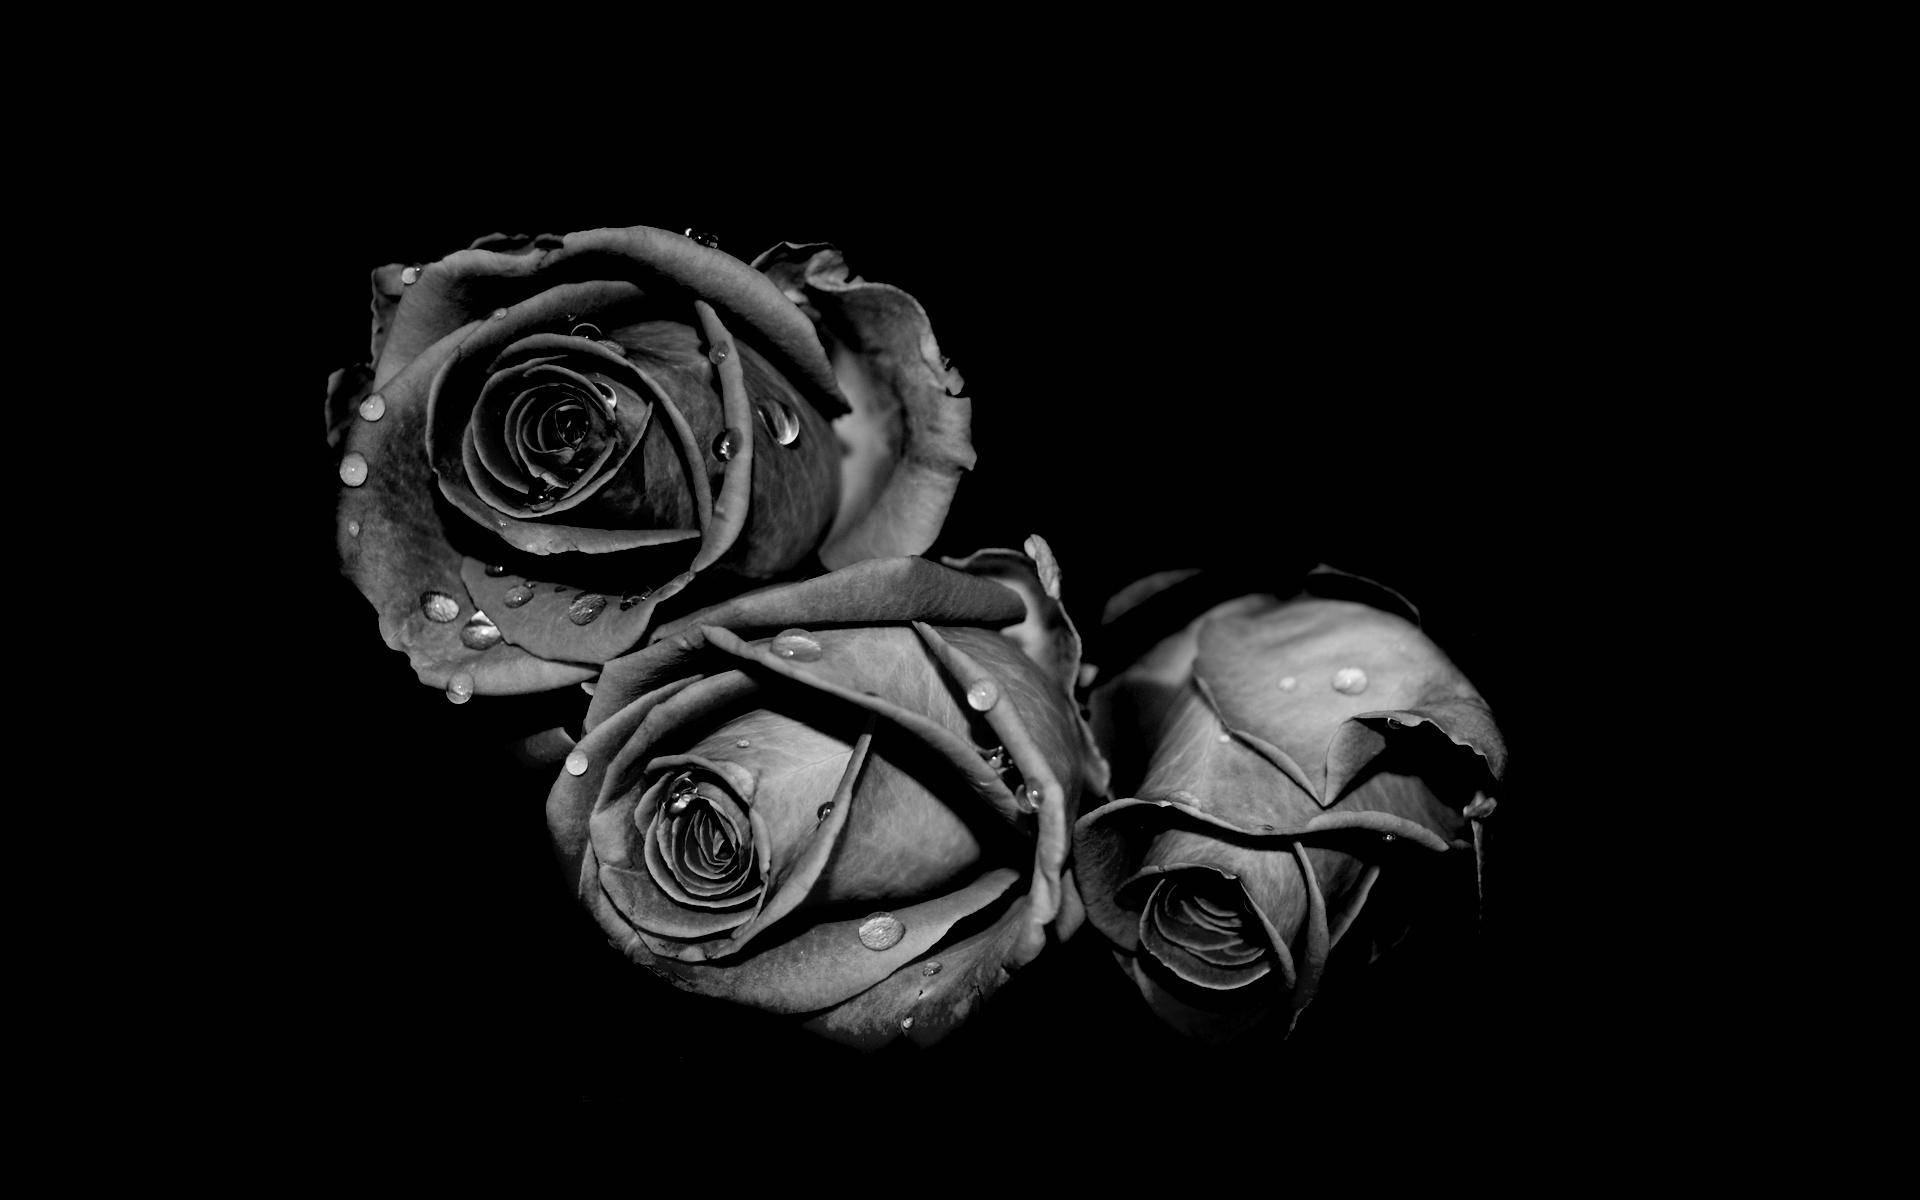 100+] Black And White Flower Wallpapers | Wallpapers.com